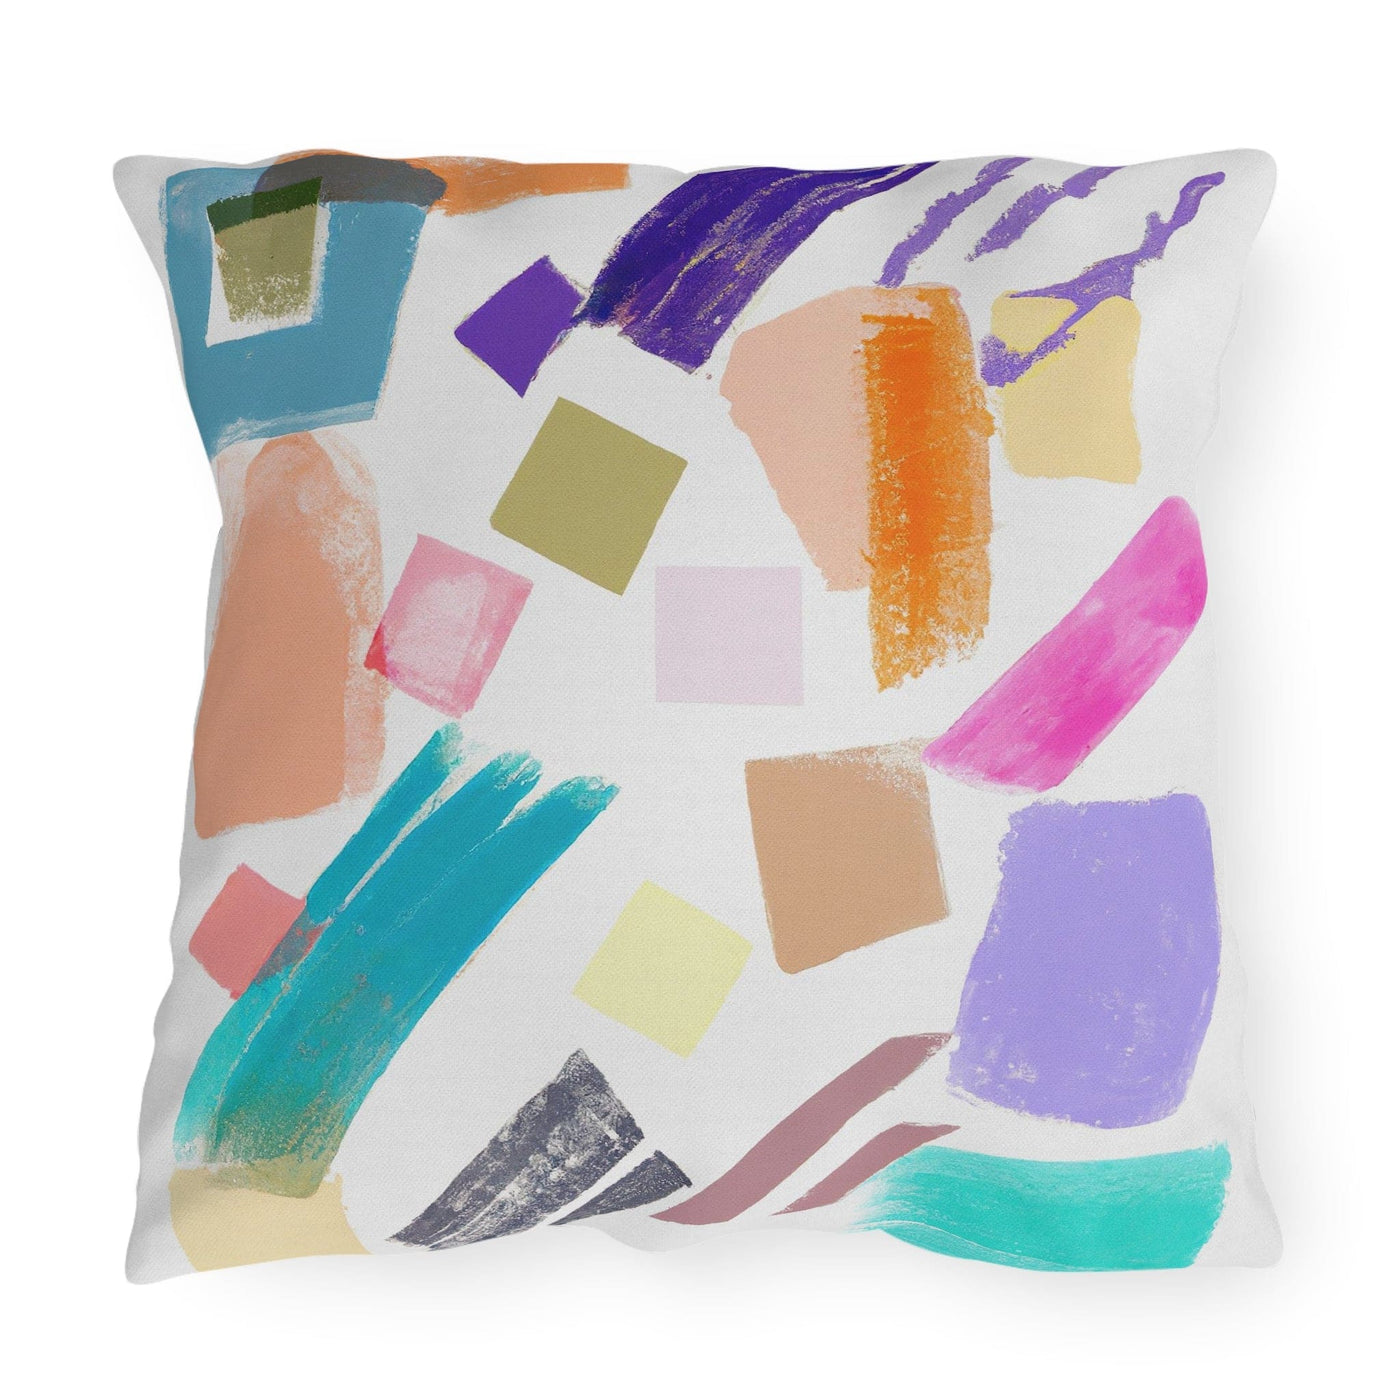 Decorative Outdoor Pillows With Zipper - Set Of 2 Multicolor Pastel Geometric